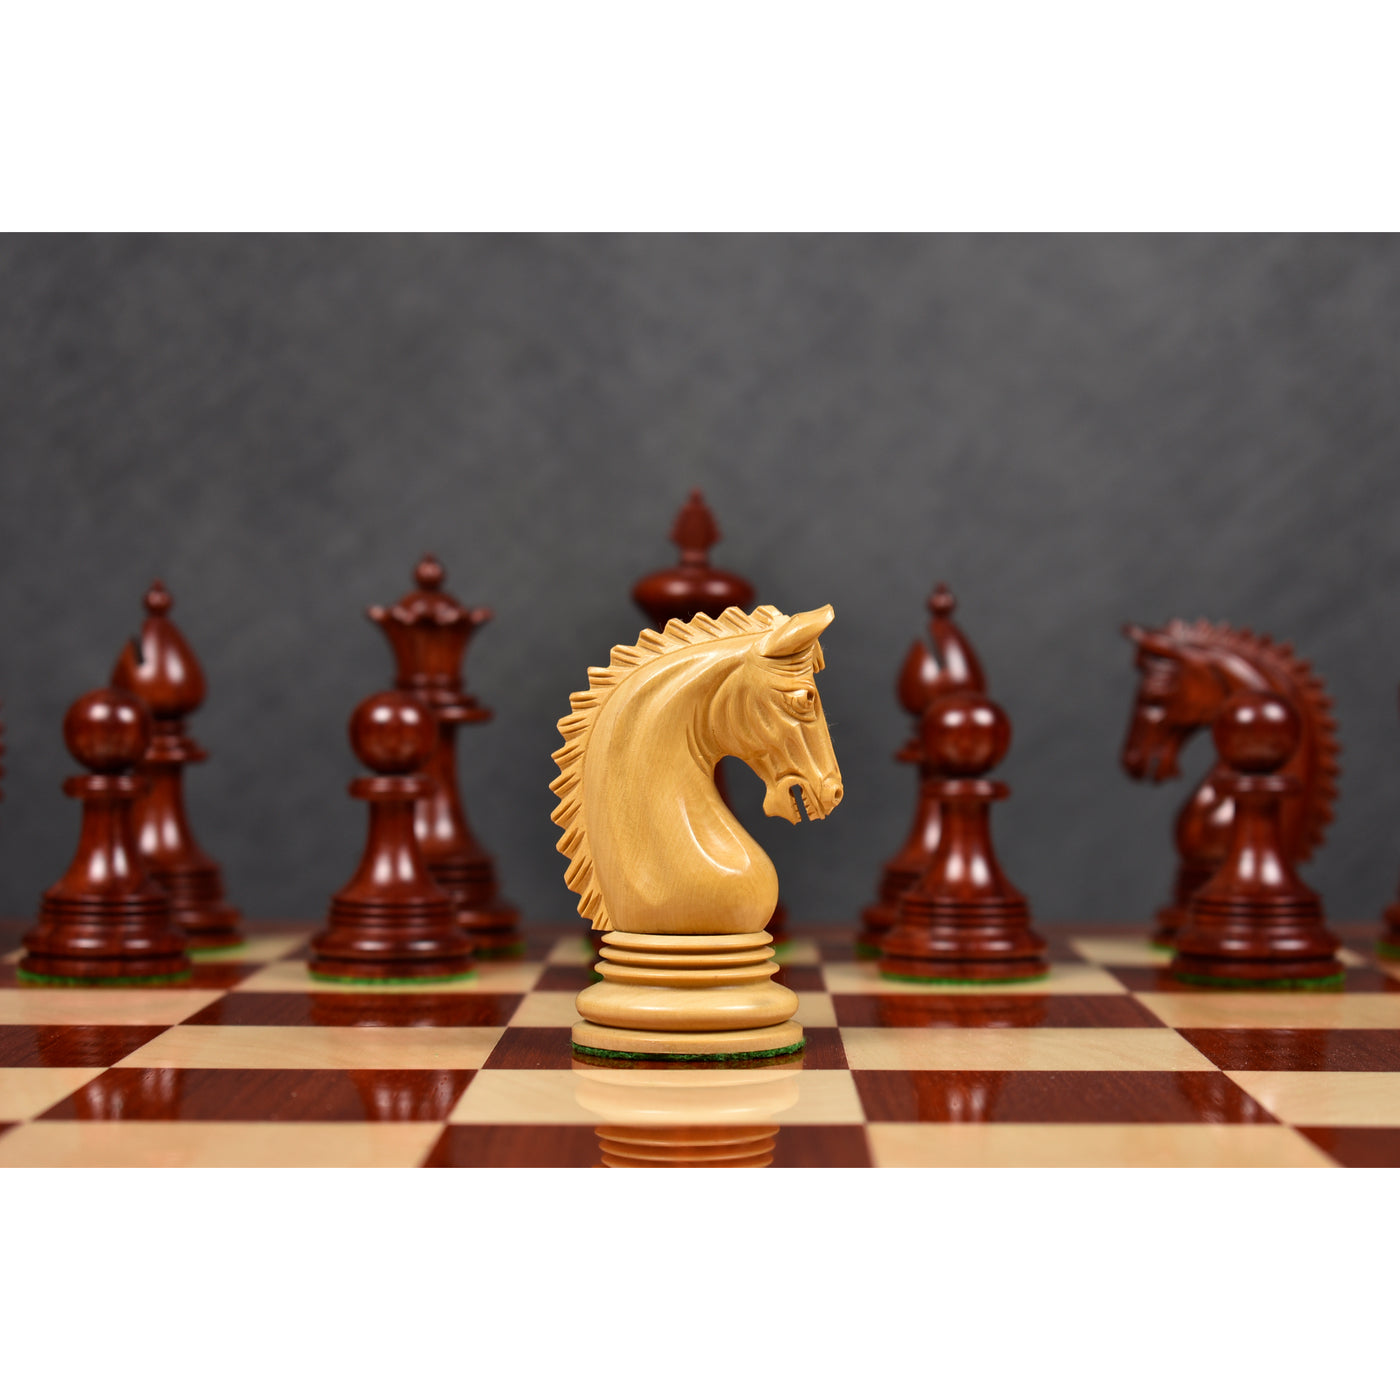 Combo of Luxury Augustus Staunton Chess Set - Pieces in Bud Rosewood with Chessboard and Storage Box